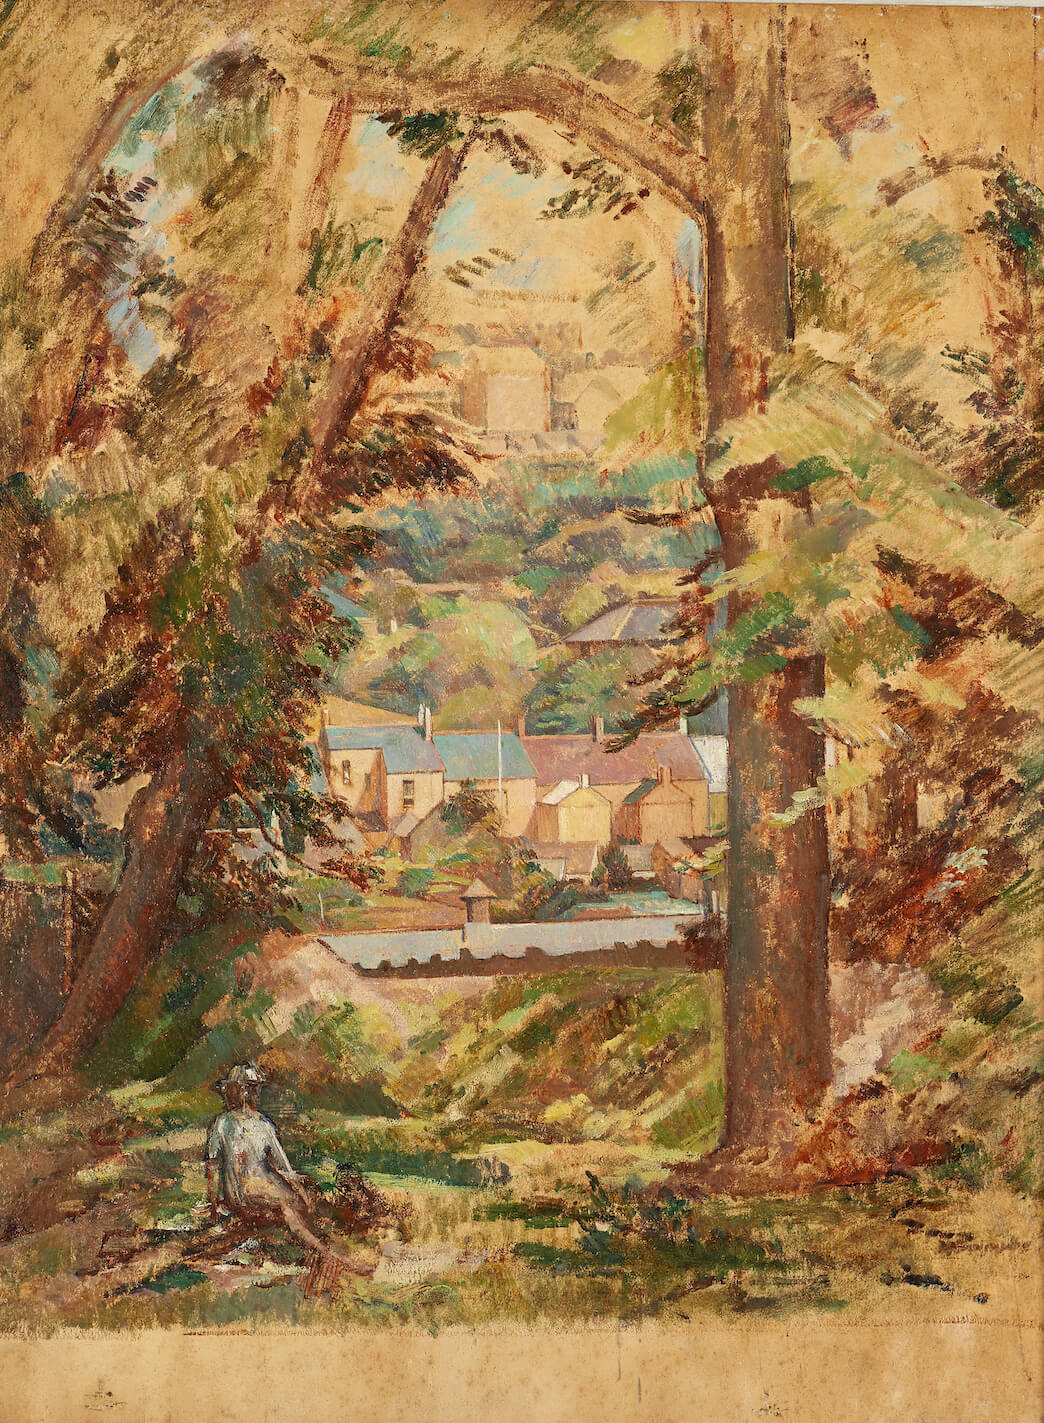 Percy Horton - View of Houses Through a Gap in Trees